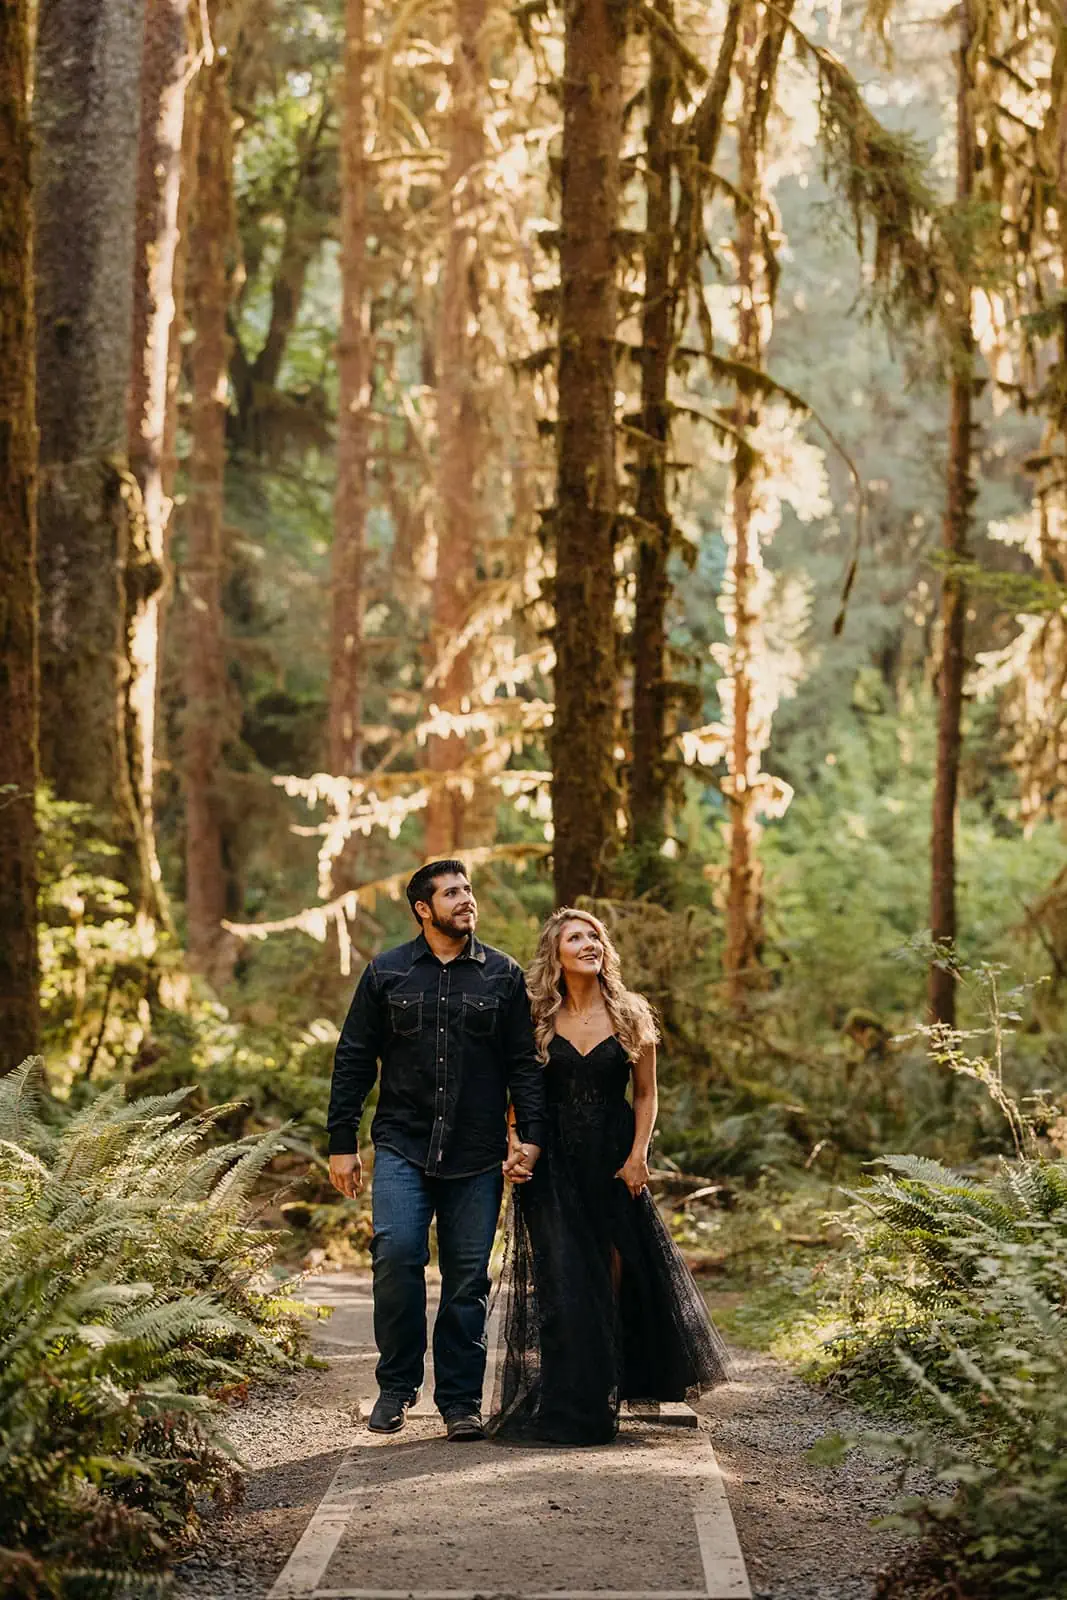 A couple walks together admiring the moss and massive trees in the HOH Raineforest.